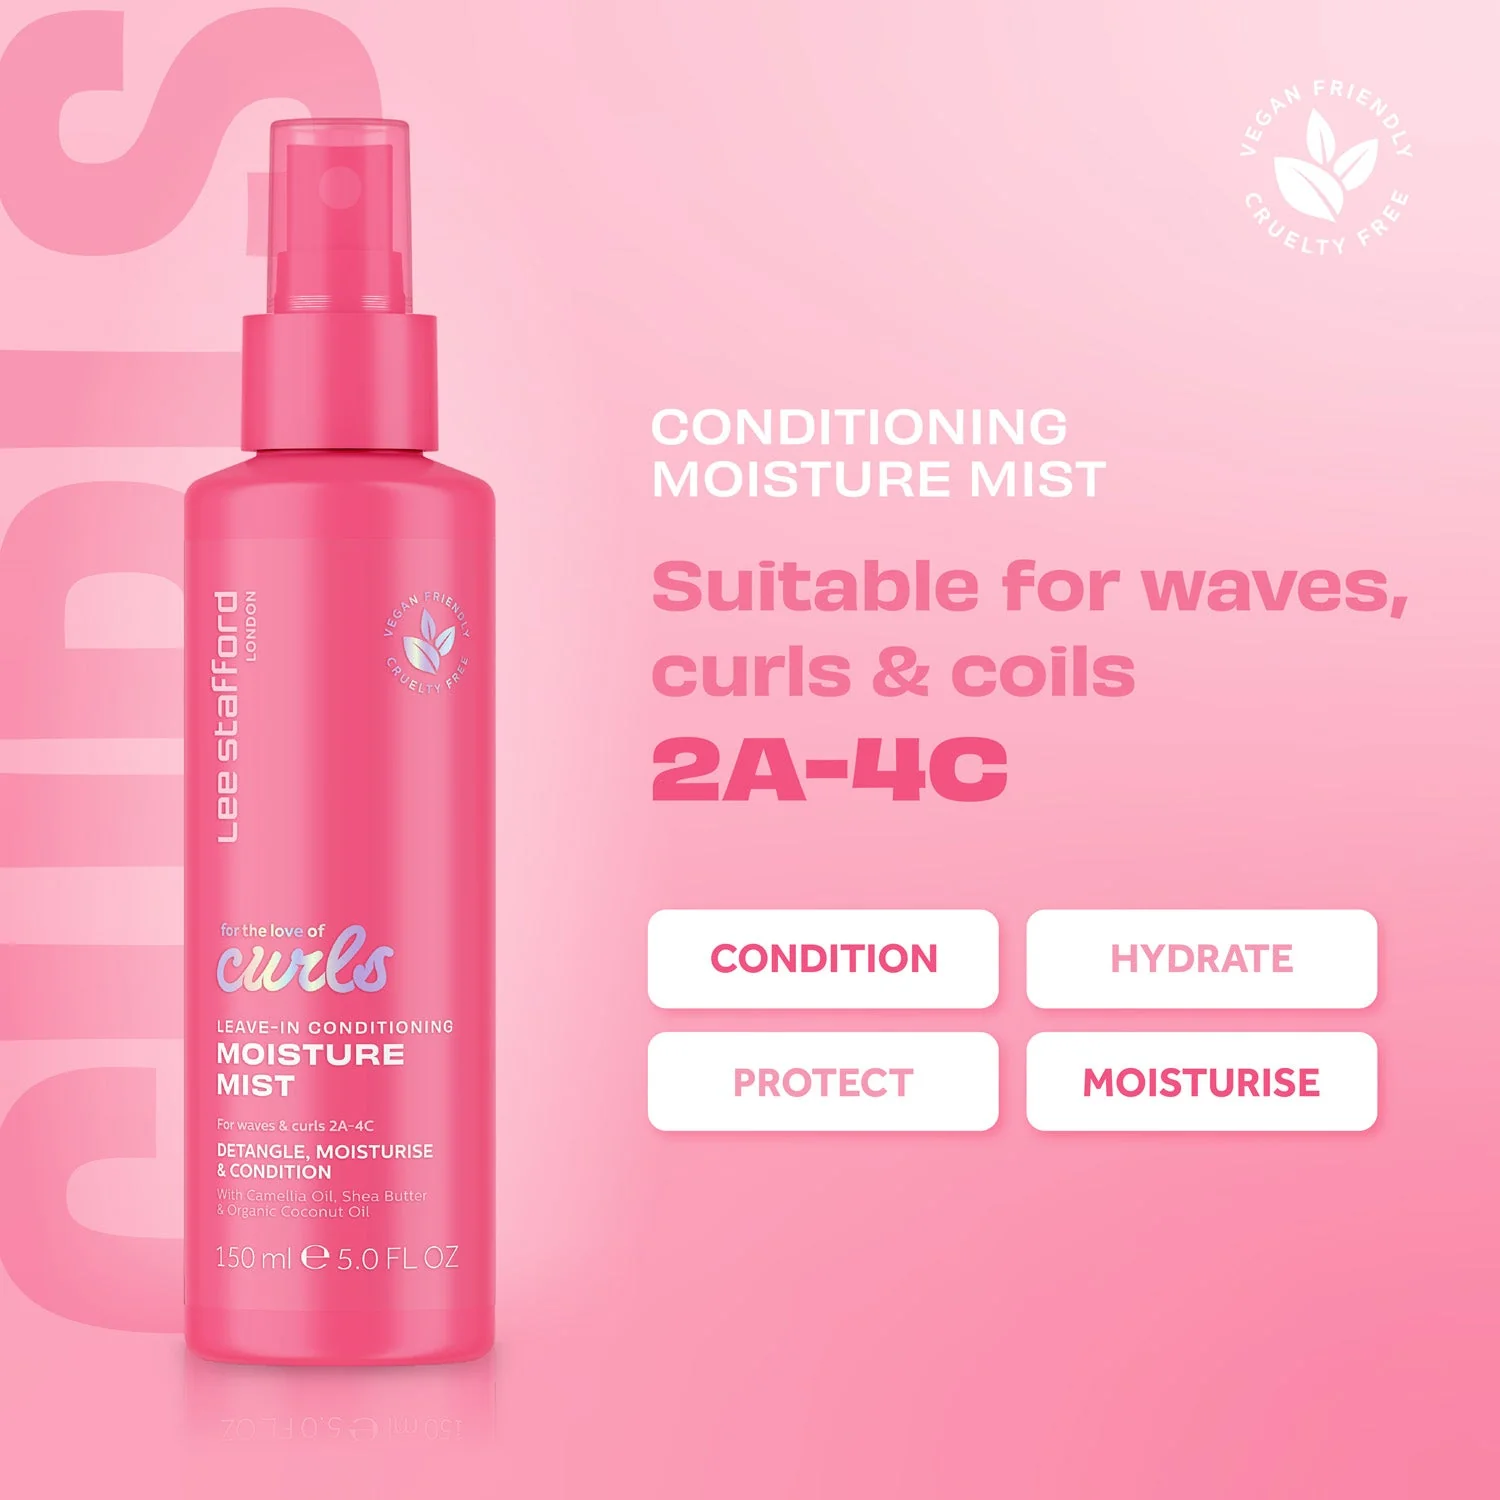 Lee Stafford For The Love Of Curls Leave-in Conditioning Moisture Mist